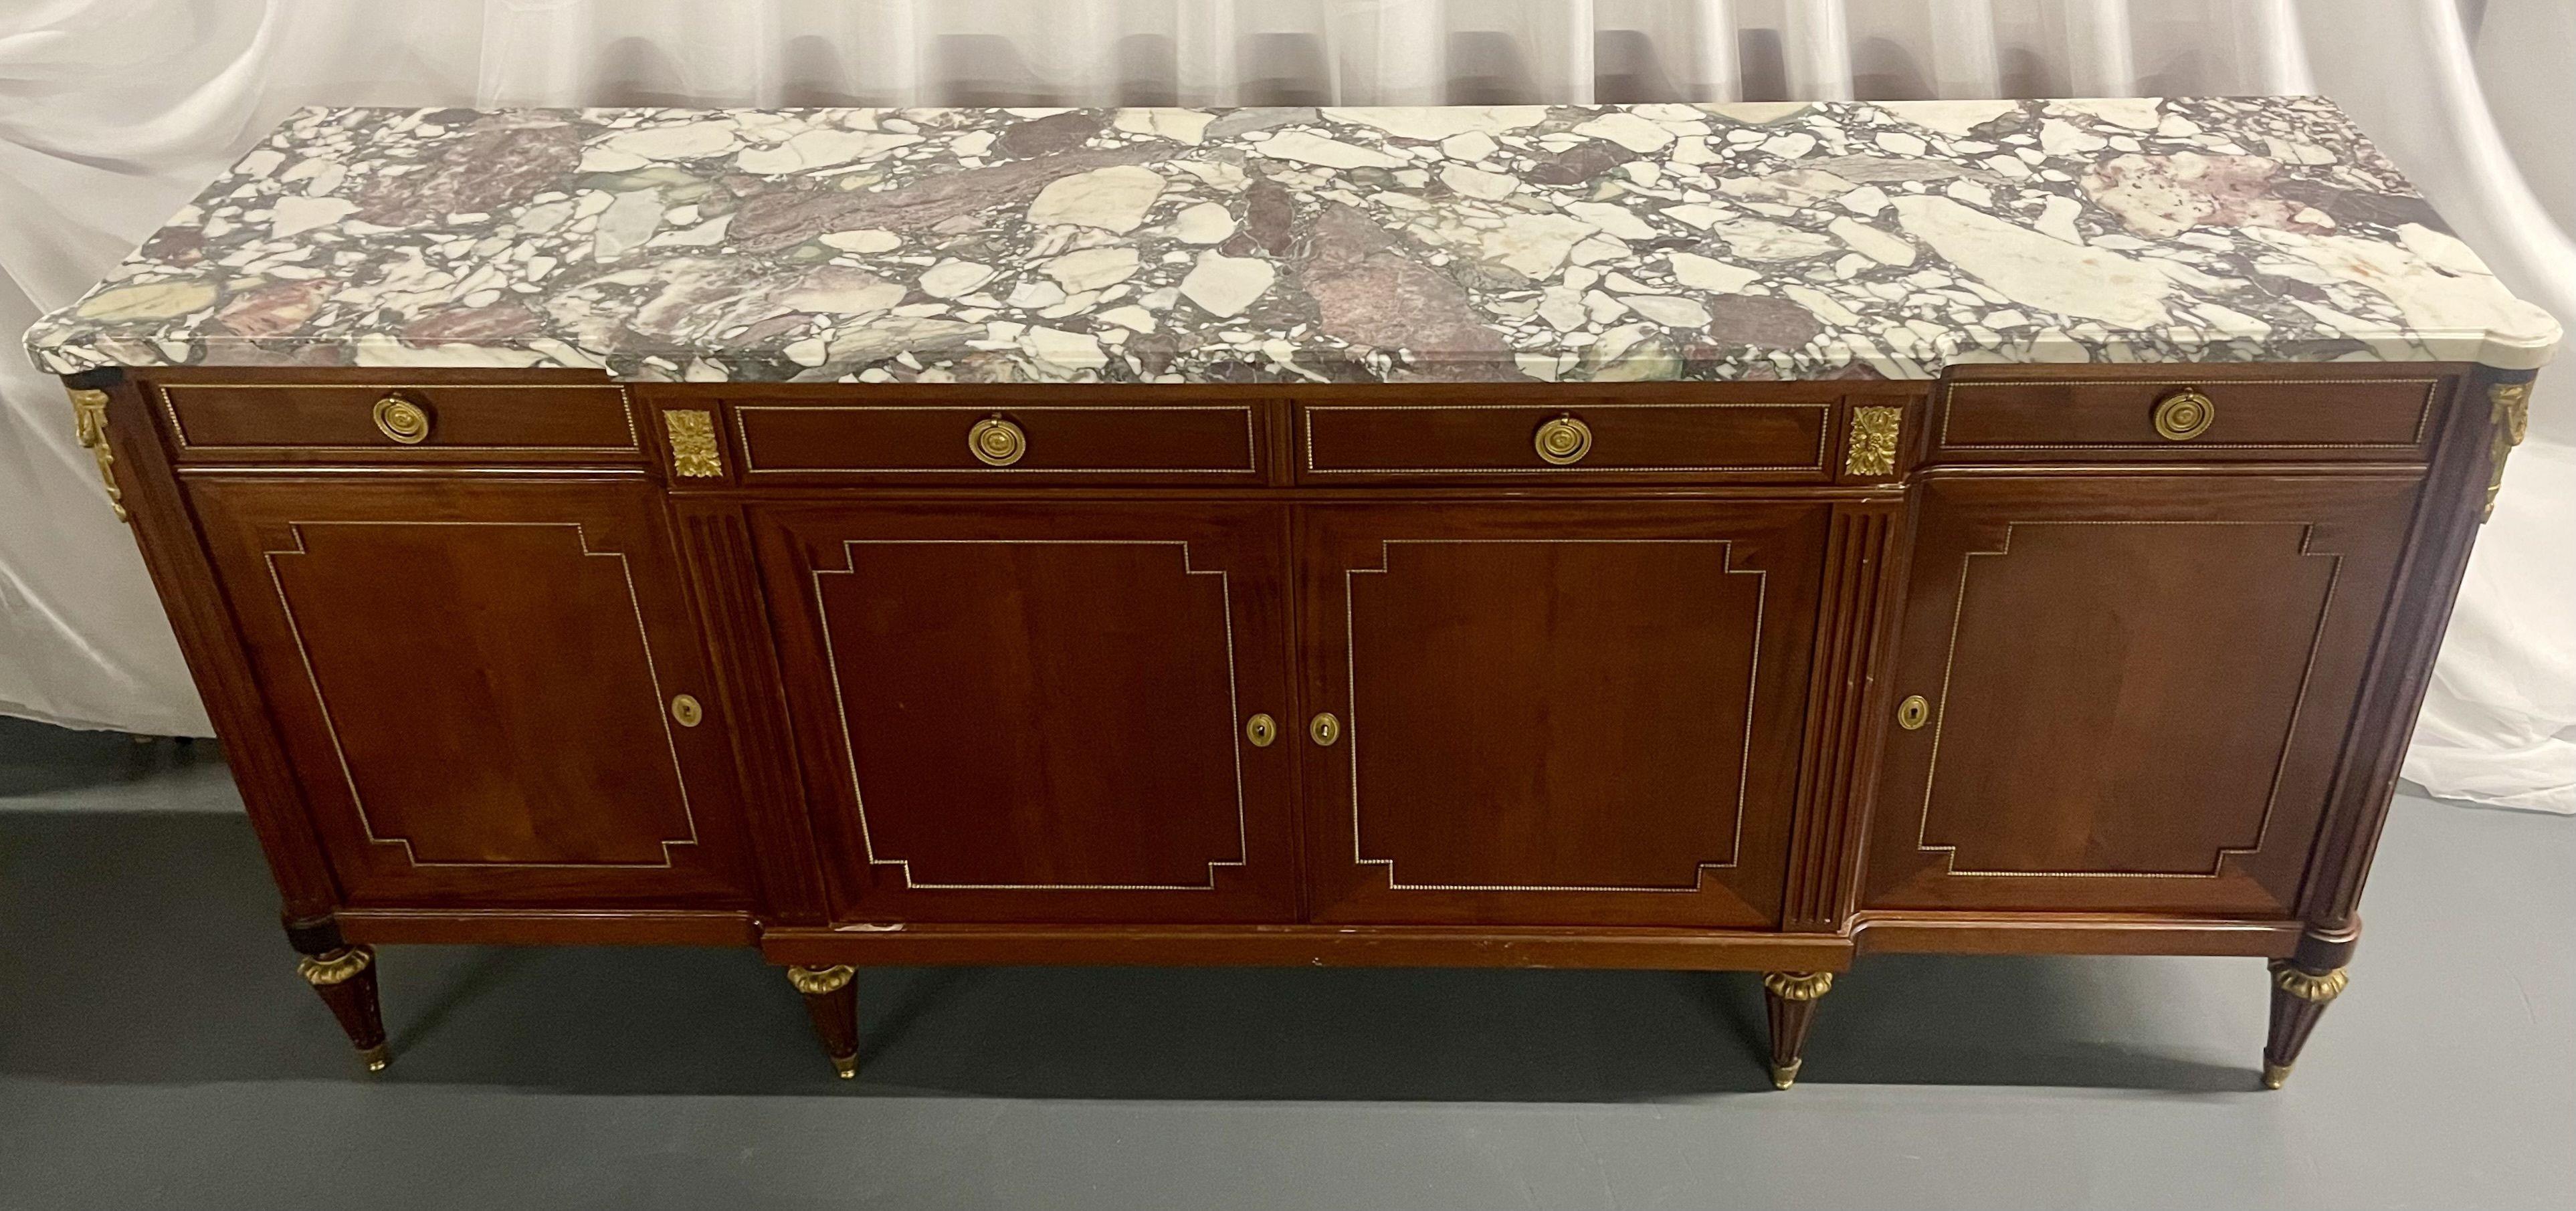 Maison Jansen Louis XVI Style Sideboard, Cabinet, Credenza, Bronze, Marble Top For Sale 5